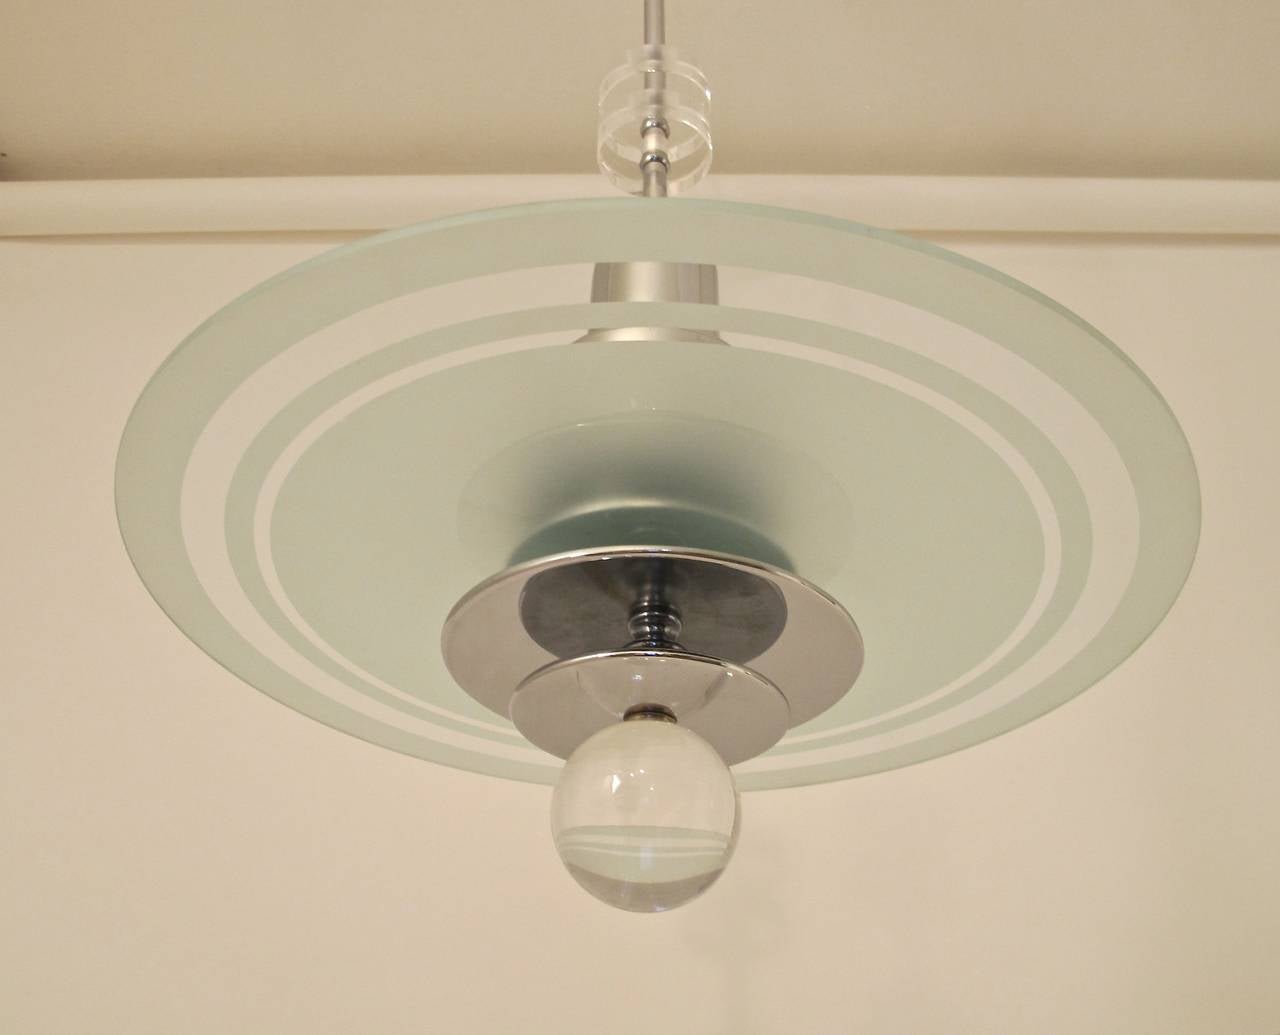 Streamline modern style chrome plated steel ceiling light with glass shade and lucite accents. High quality craftsmanship, custom made in the late 20th century (1980's) based on an American fixture from the 1930's - 1940's. We have 6 fixtures